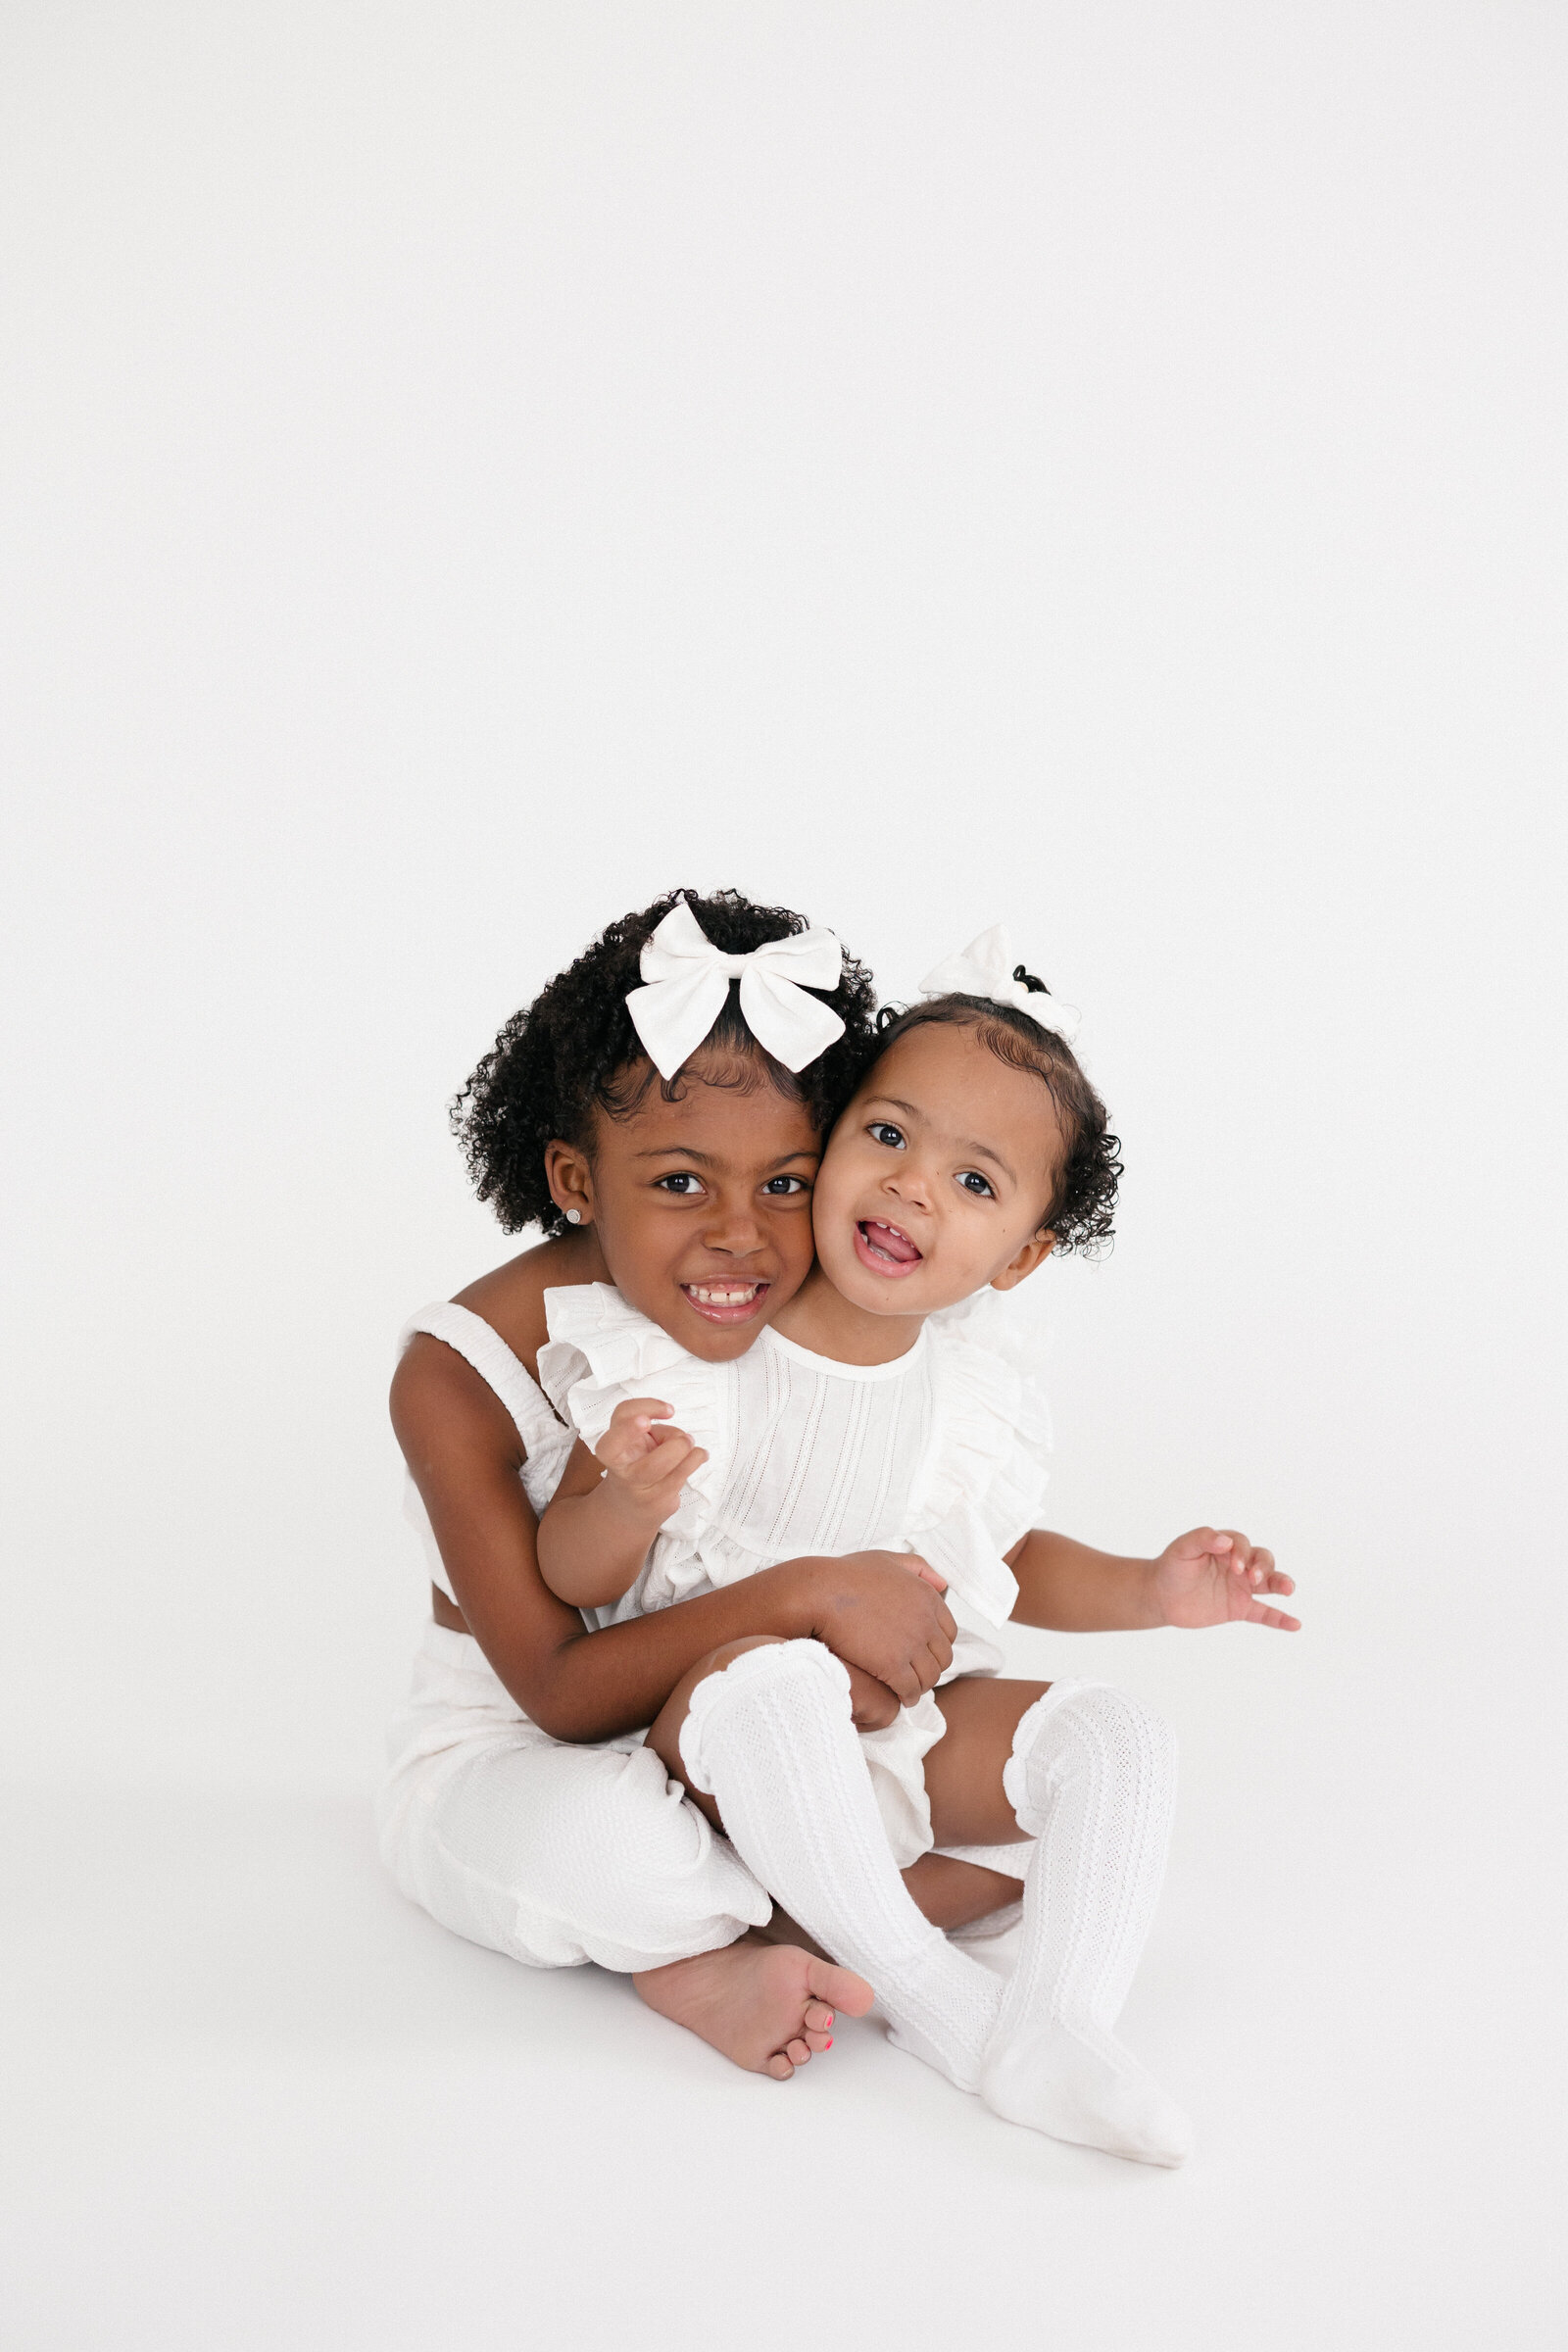 Two sisters snuggling and smiling as they wear all white and sit on a white backdrop